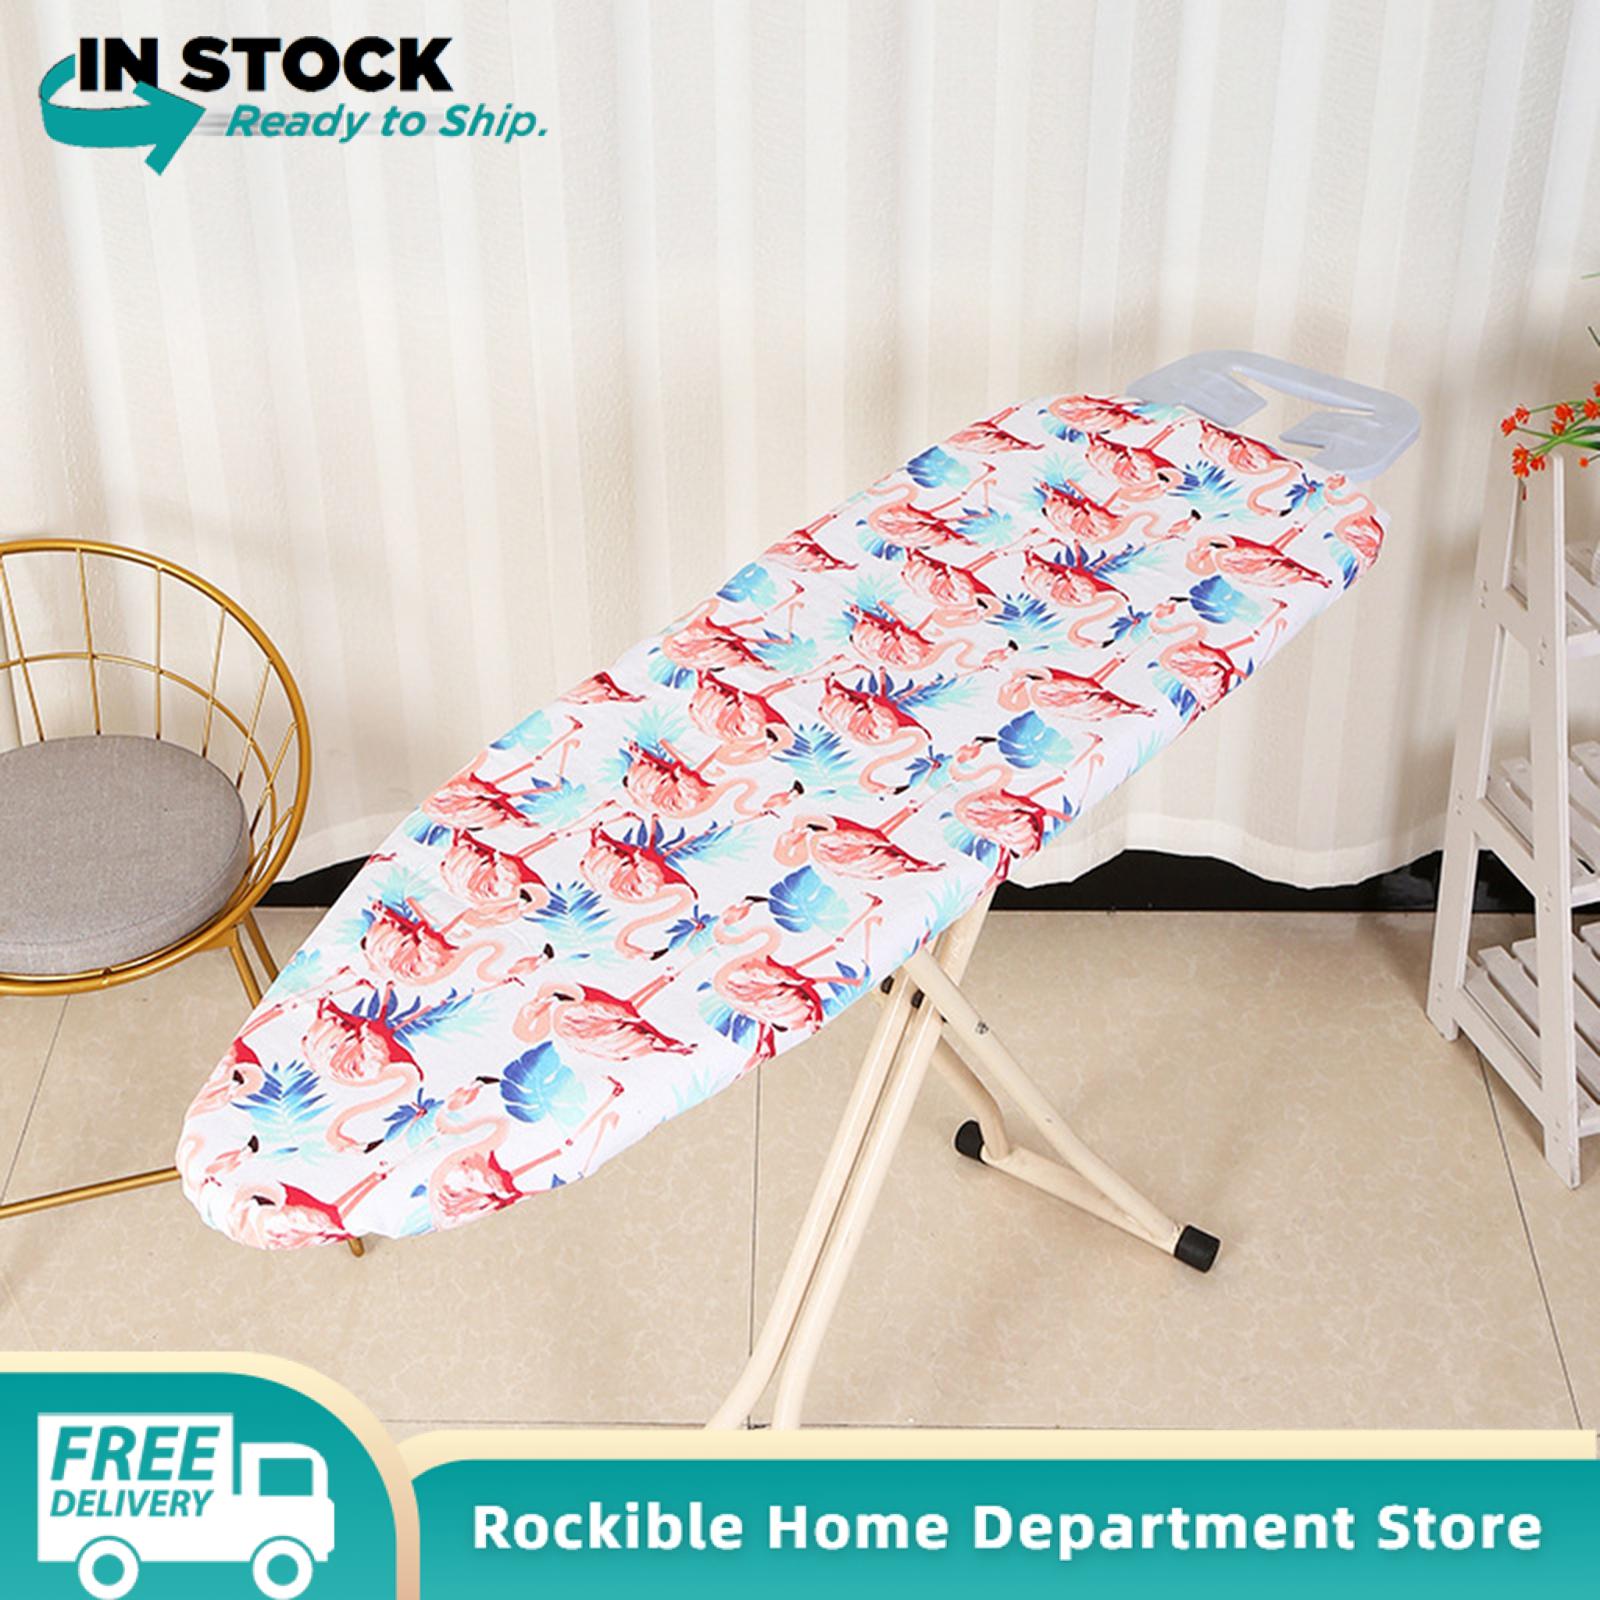 rockible Durable Ironing Board Padded Cover Blanket Pad Nonslip Resists